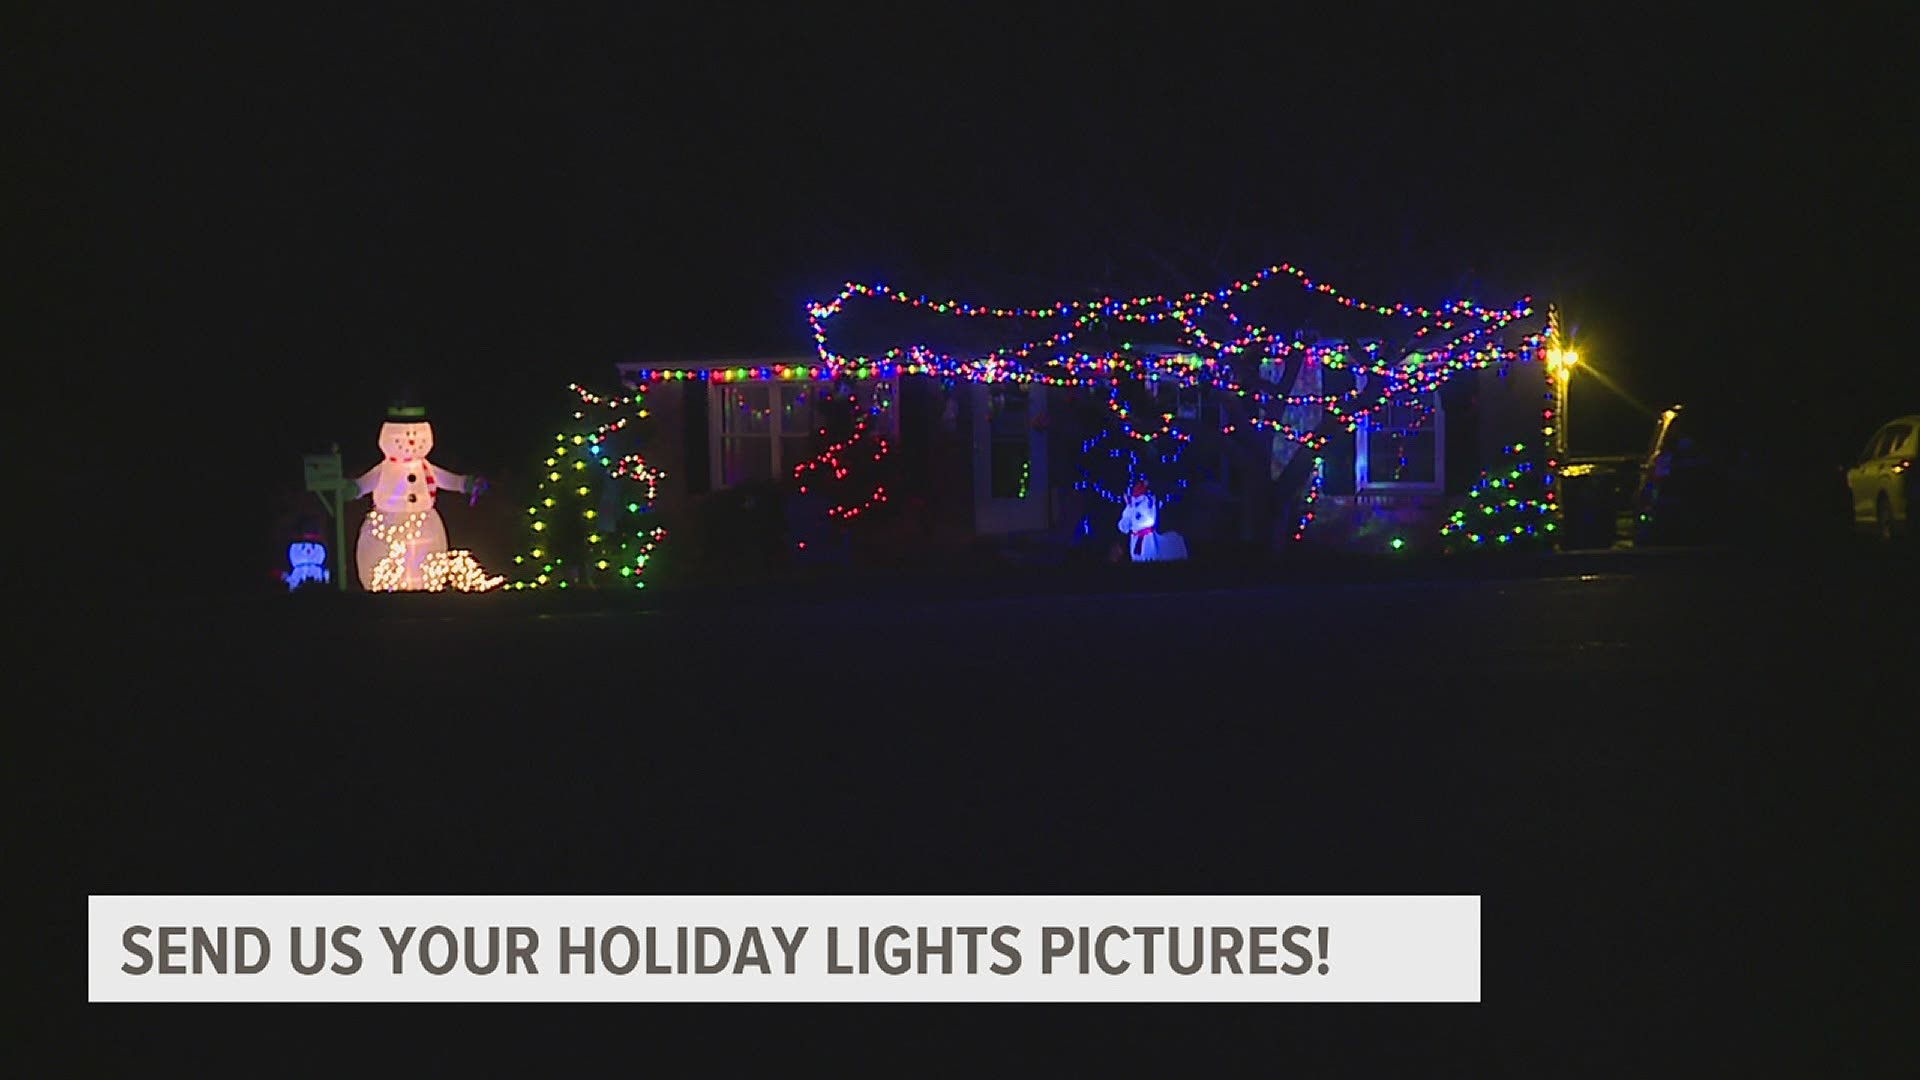 You can use the Near Me feature in the FOX43 App to let us know exactly where your Holiday Lights are in Central Pennsylvania.